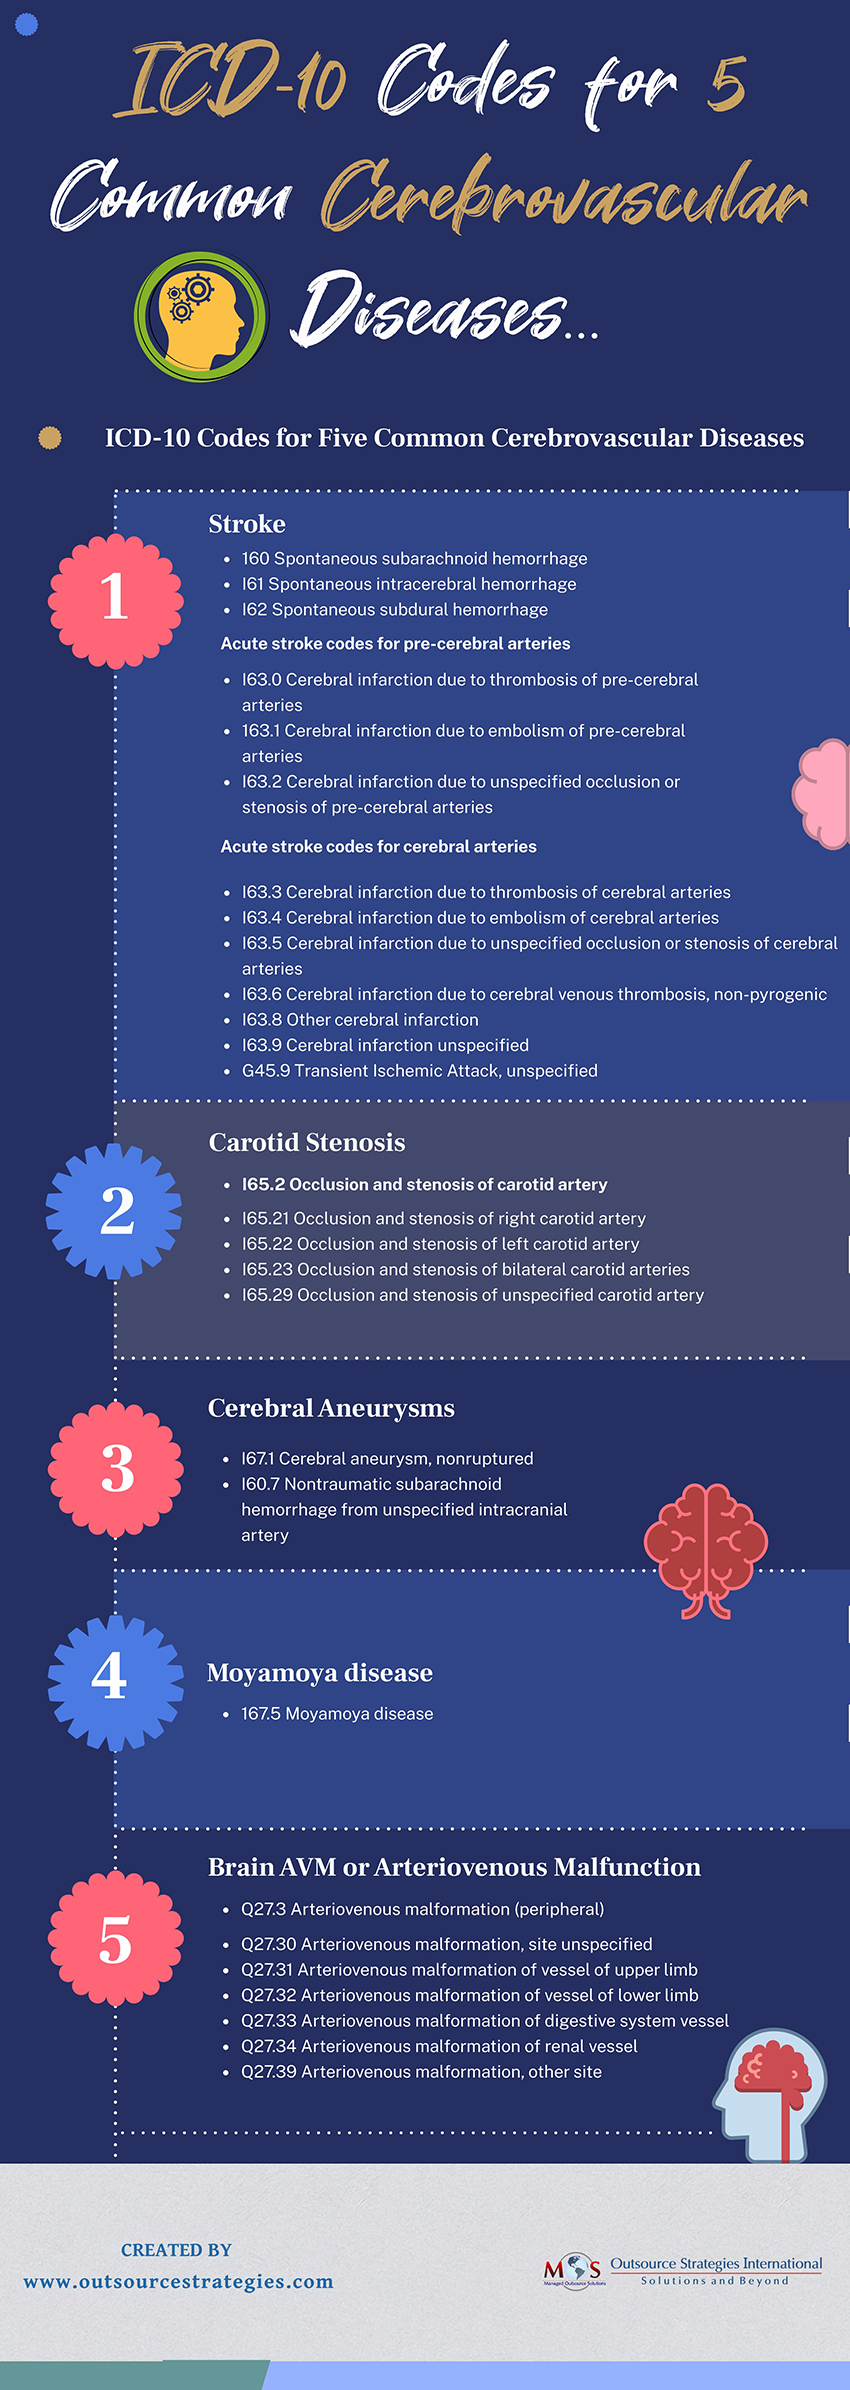 ICD-10 Codes for 5 Common Cerebrovascular Diseases